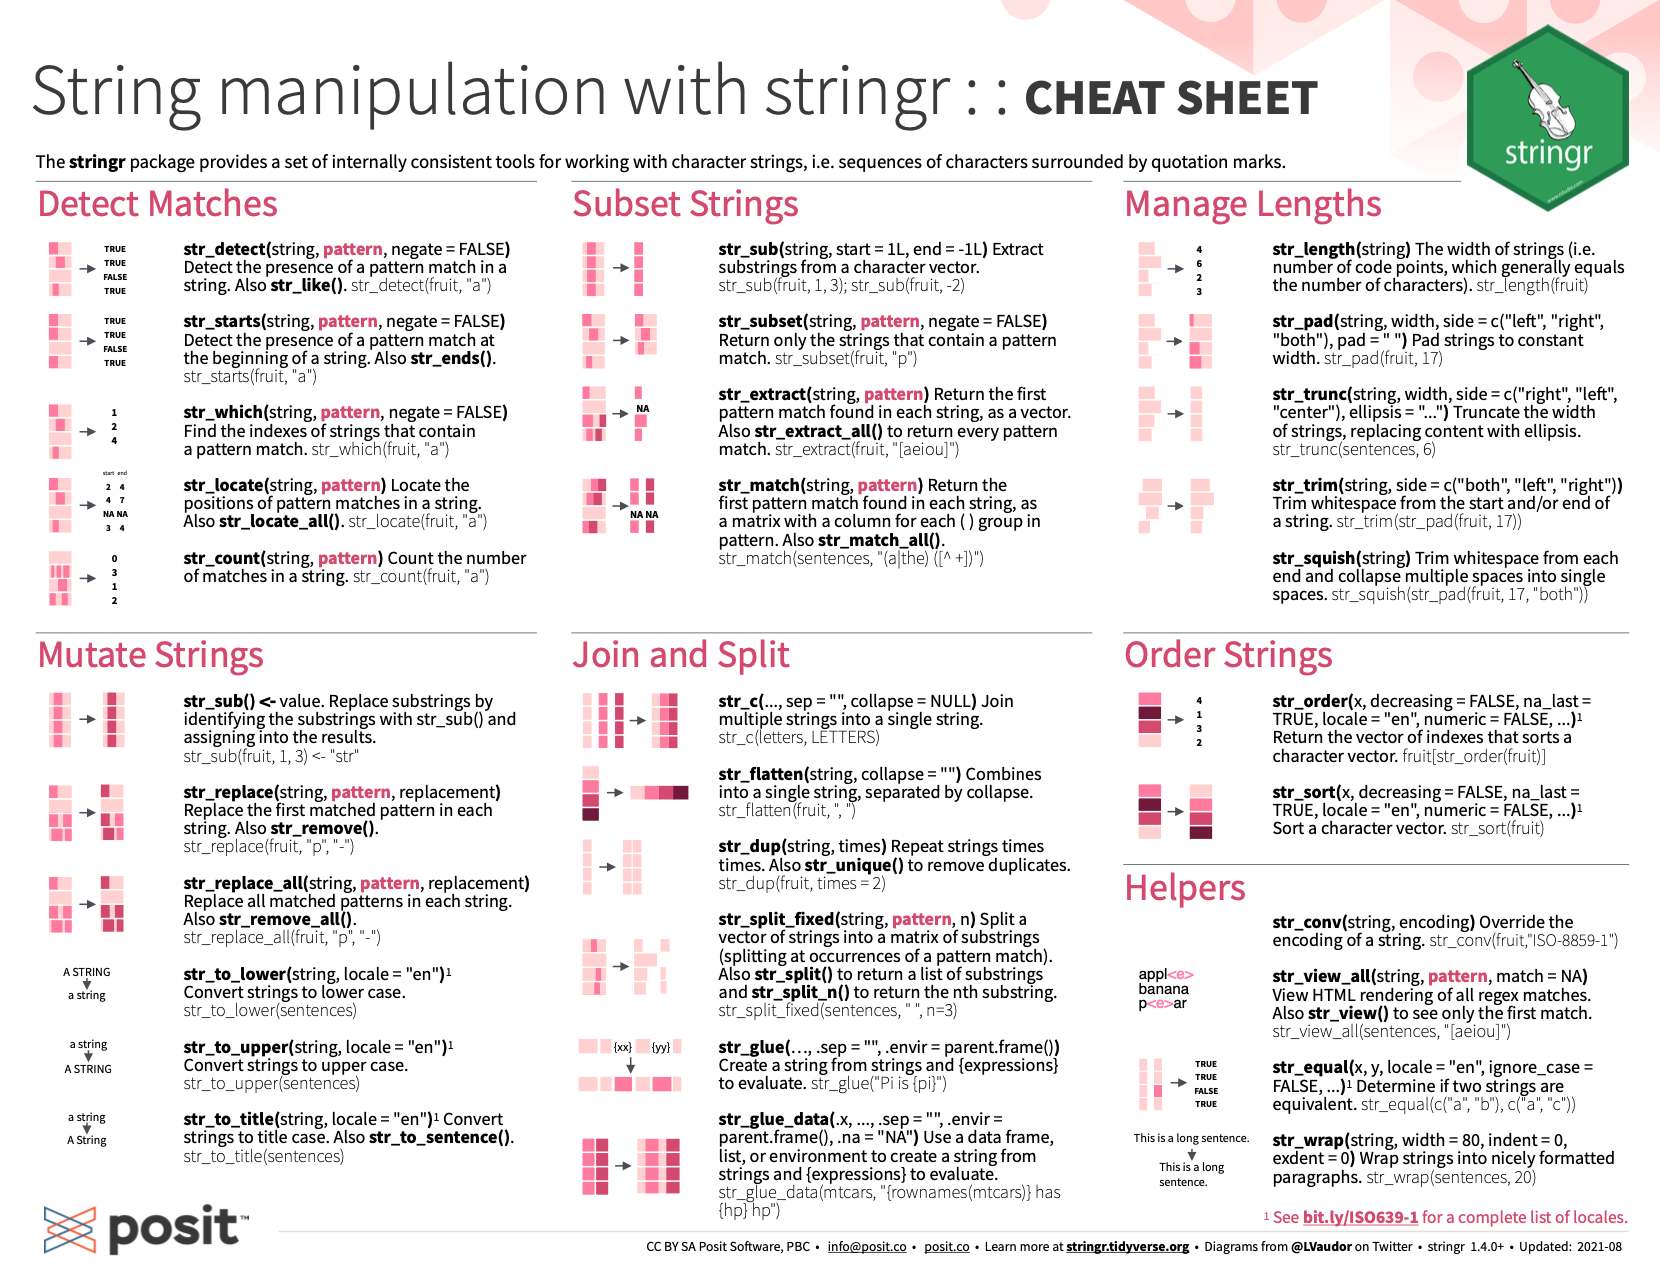 Text and string manipulation with stringr and regular expressions from RStudio cheatsheets.